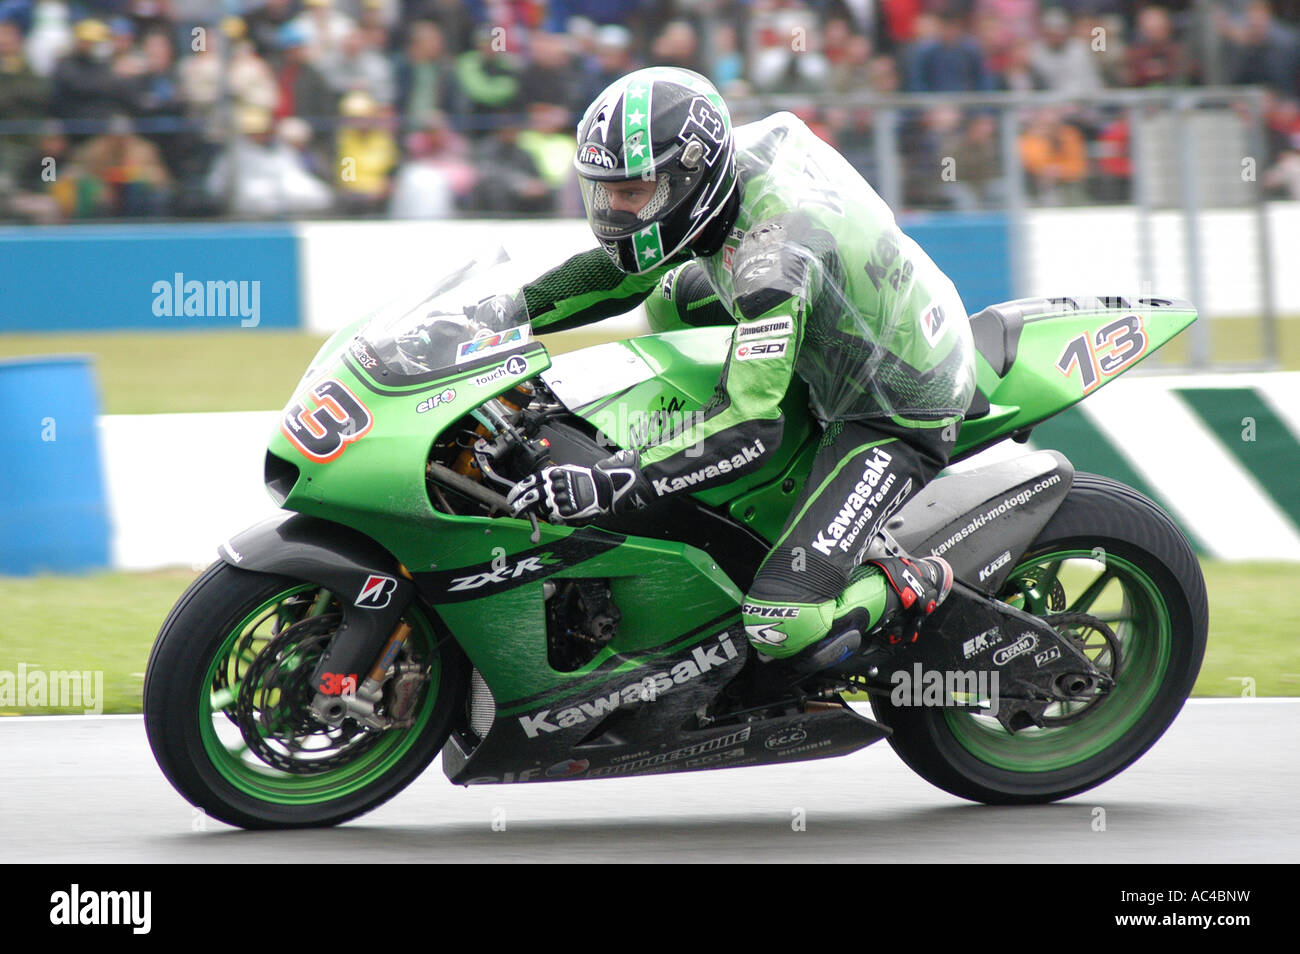 Anthony West (AUS) racing at the 2007 Nickel & Dime British Motorcycle Grand Prix - Donington Park Stock Photo